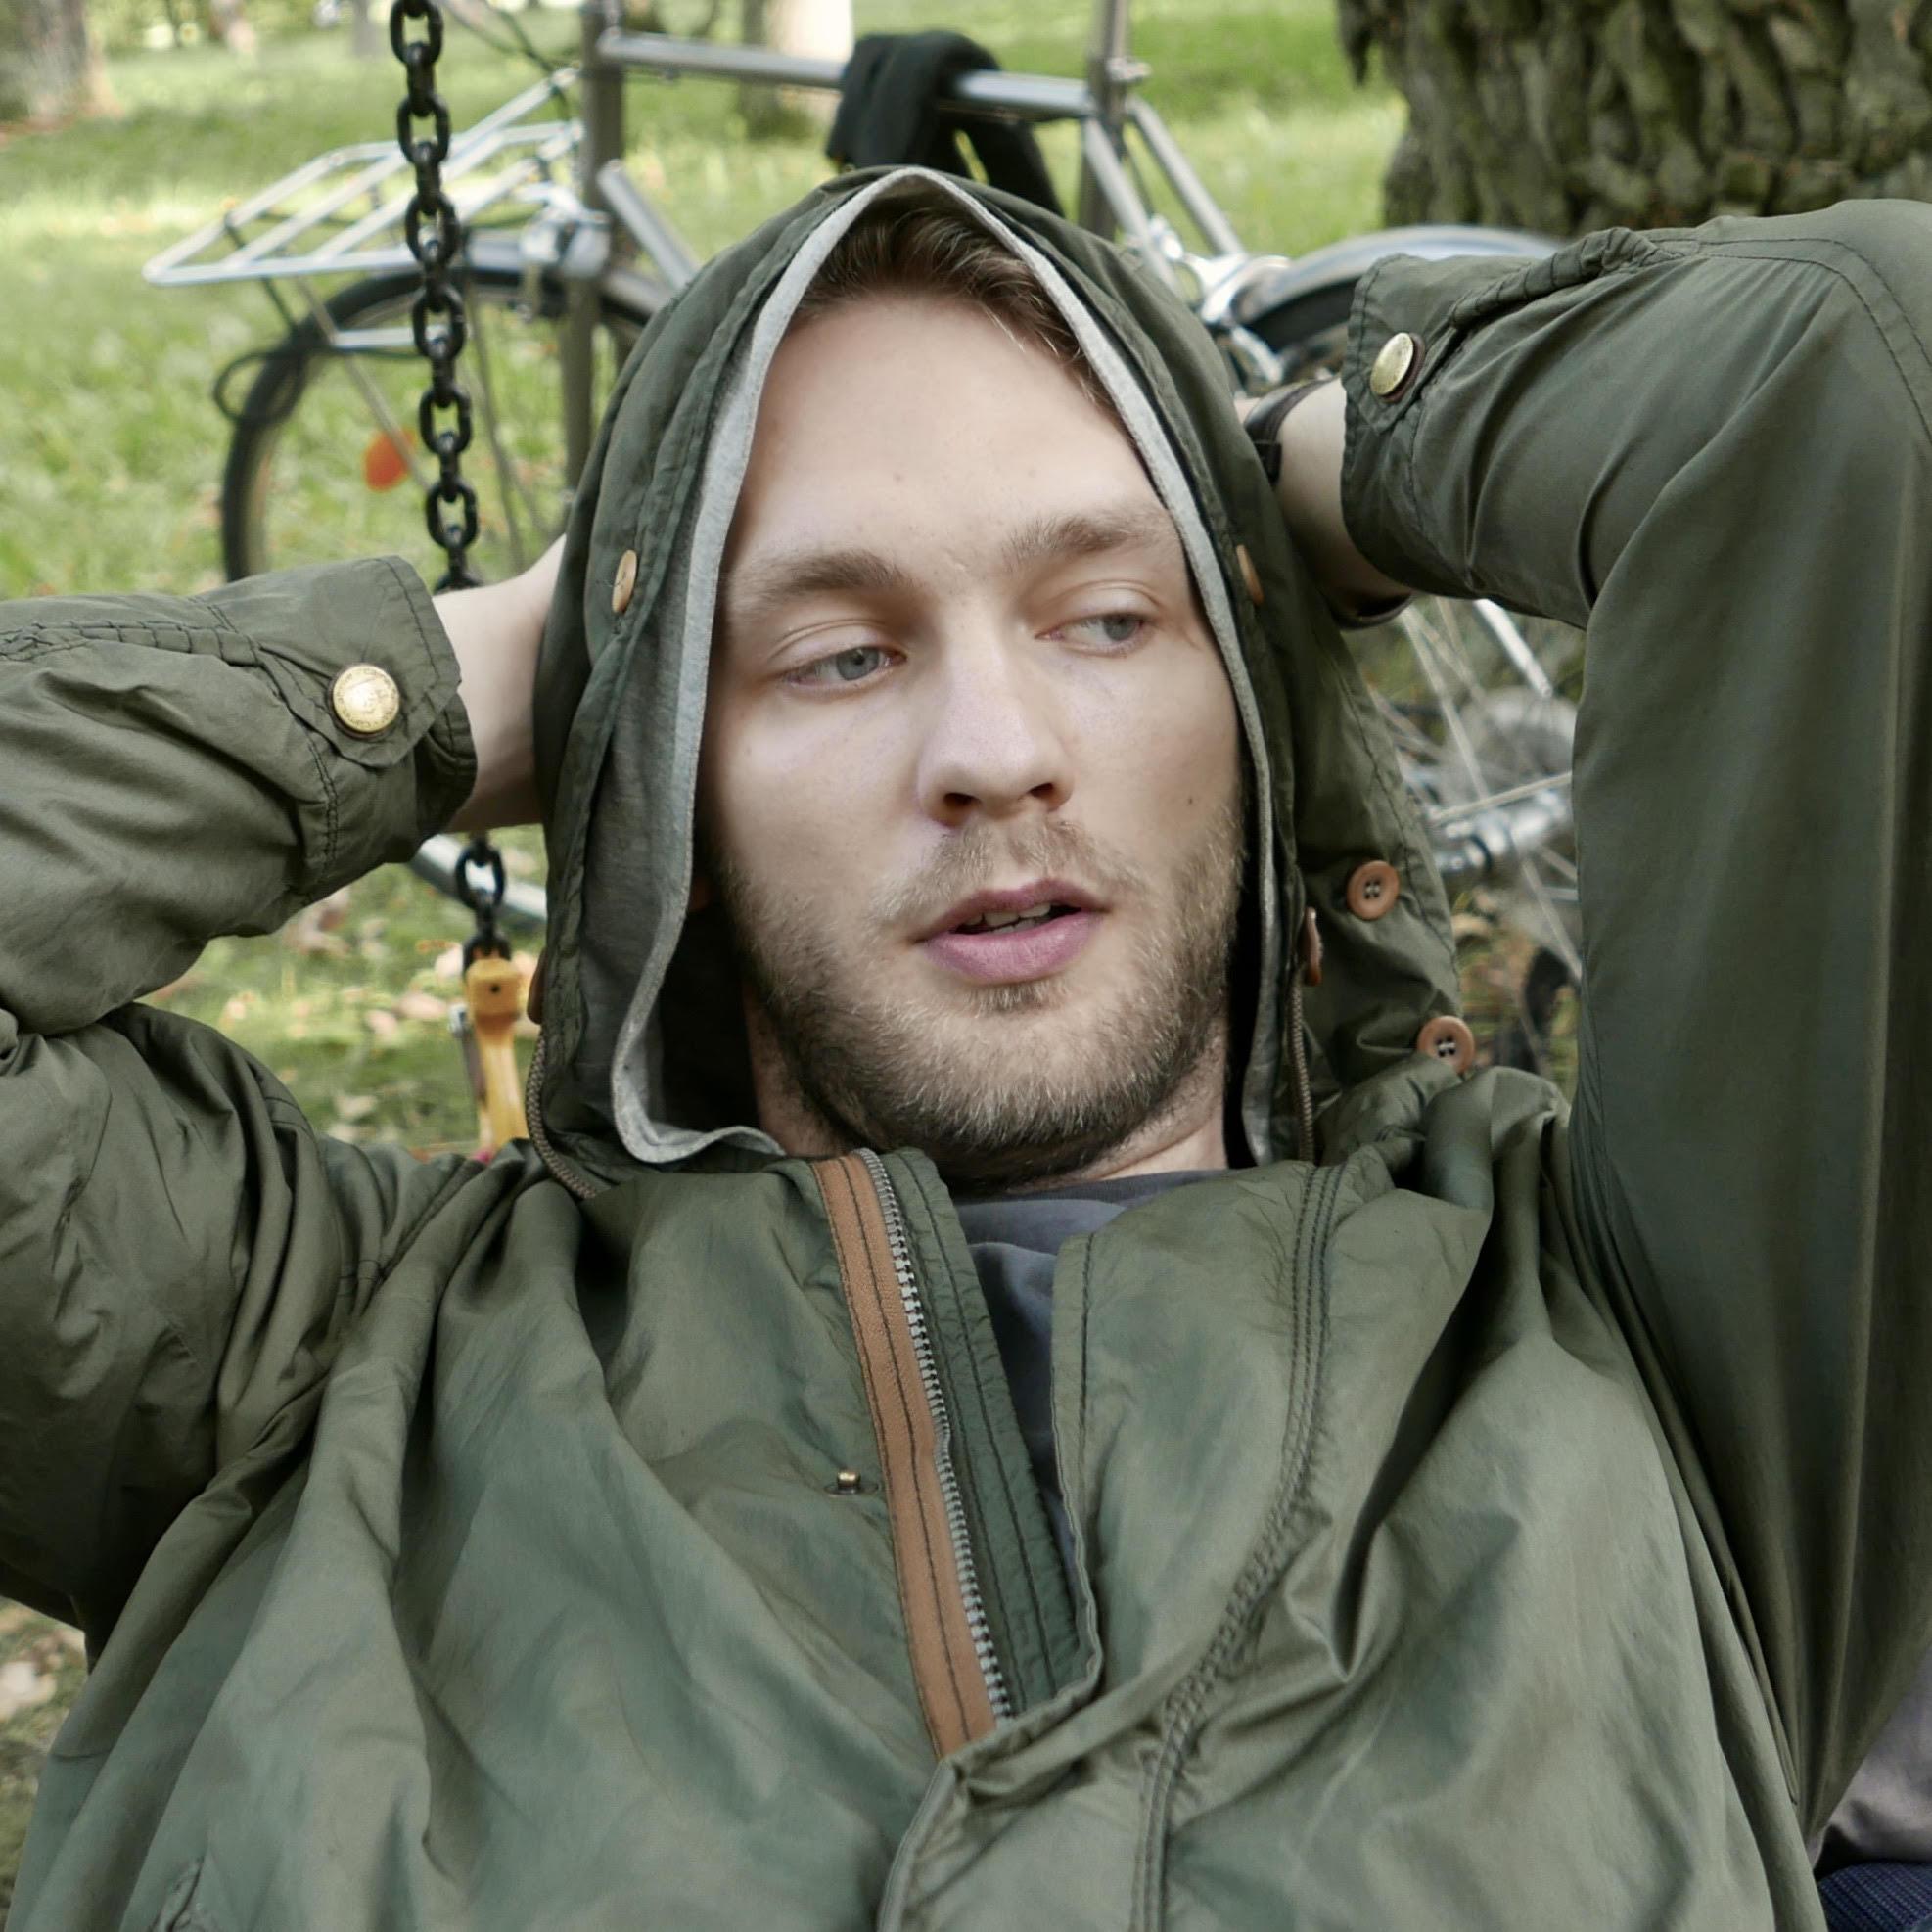 Marten Esko, a white-skinned person with blonde hair and blonde beard and mustache. Marten is wearing a green jacket with a hoodie. Framed from the waist up, Marten has placed his hands behind his head in the picture. The backdrop of the picture features a tree, grass and a bicycle.